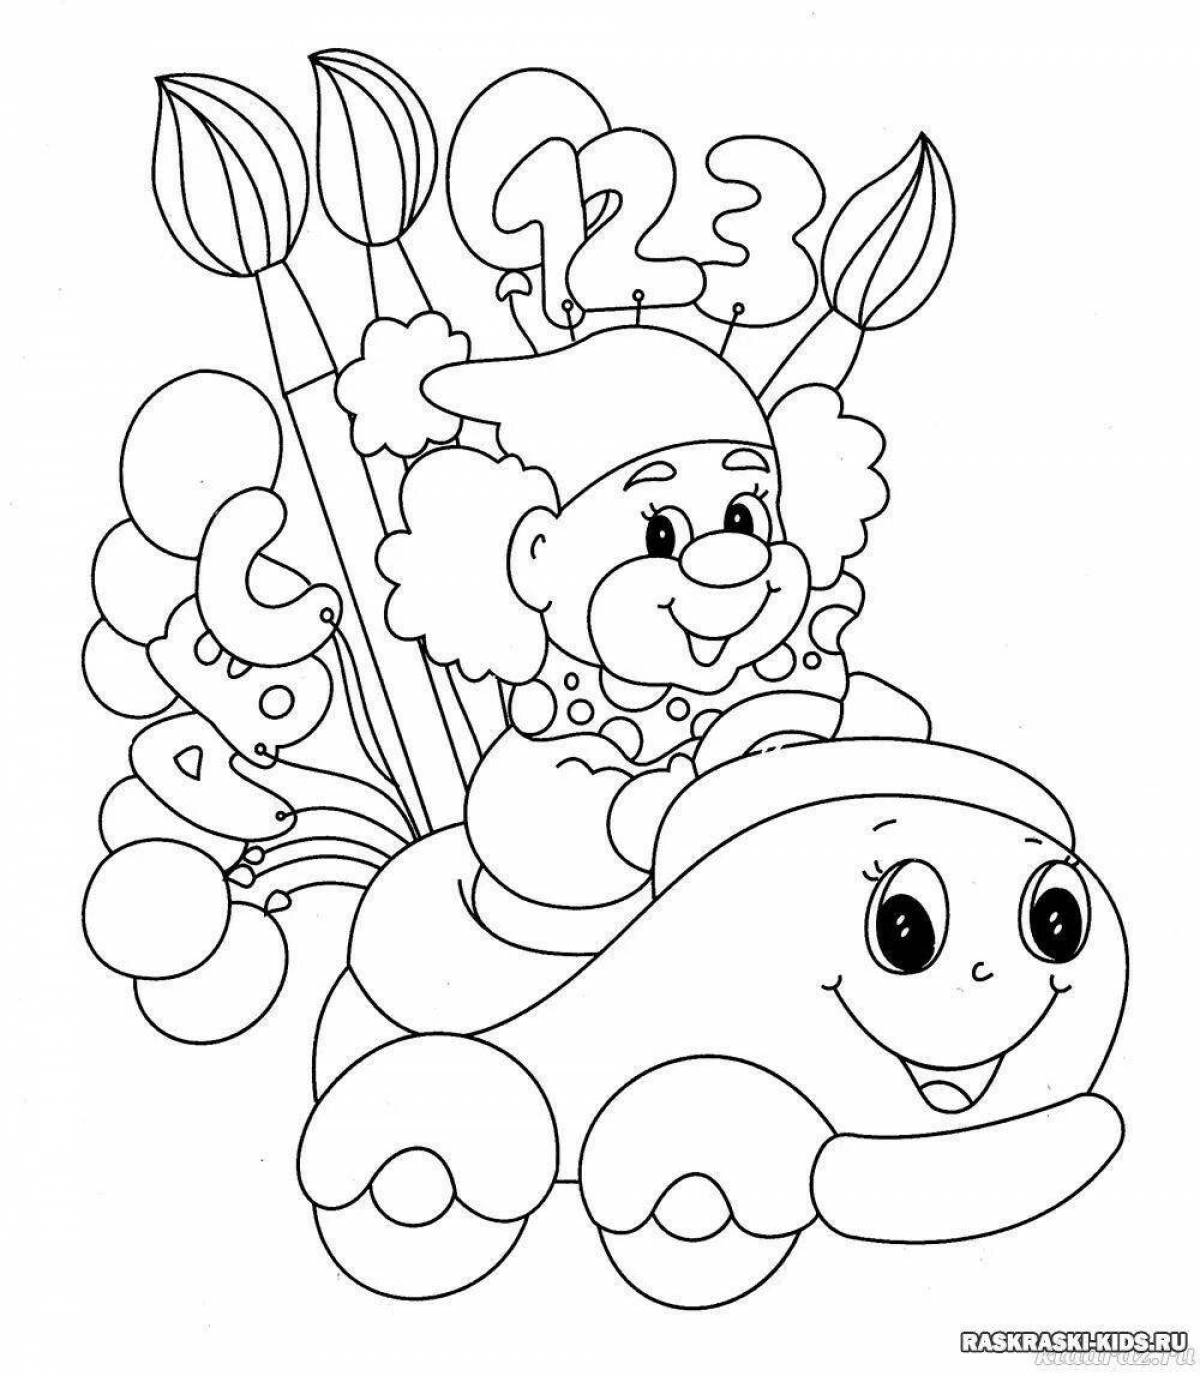 Color-bright coloring book for preschoolers 4-5 years old